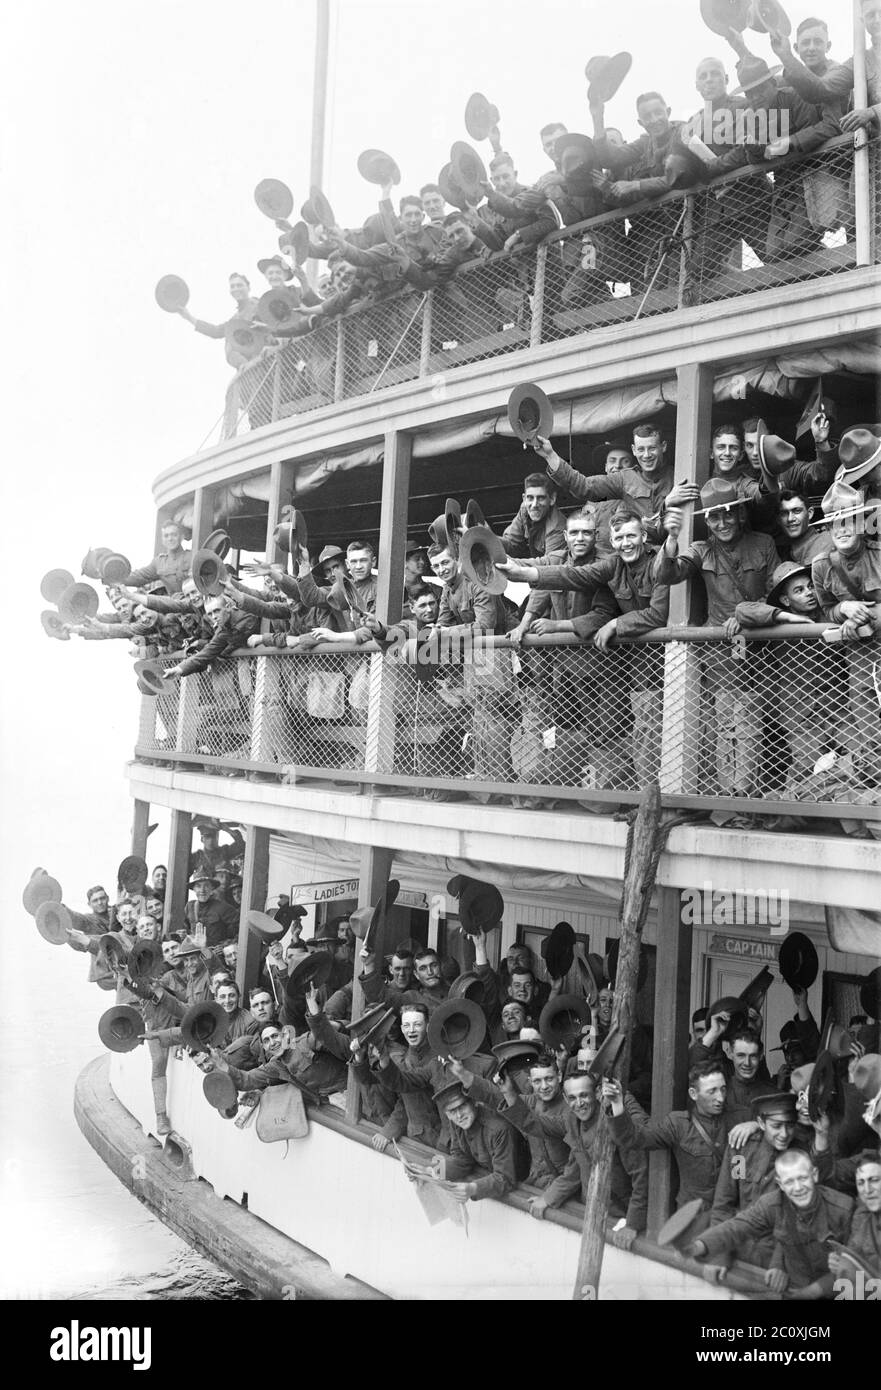 American Soldiers on Boat leaving Fort Slocum, a Military Post that served as Major Recruiting Station during World War I, Davids' Island, New Rochelle, New York, USA, Bain News Service, 1917 Stock Photo